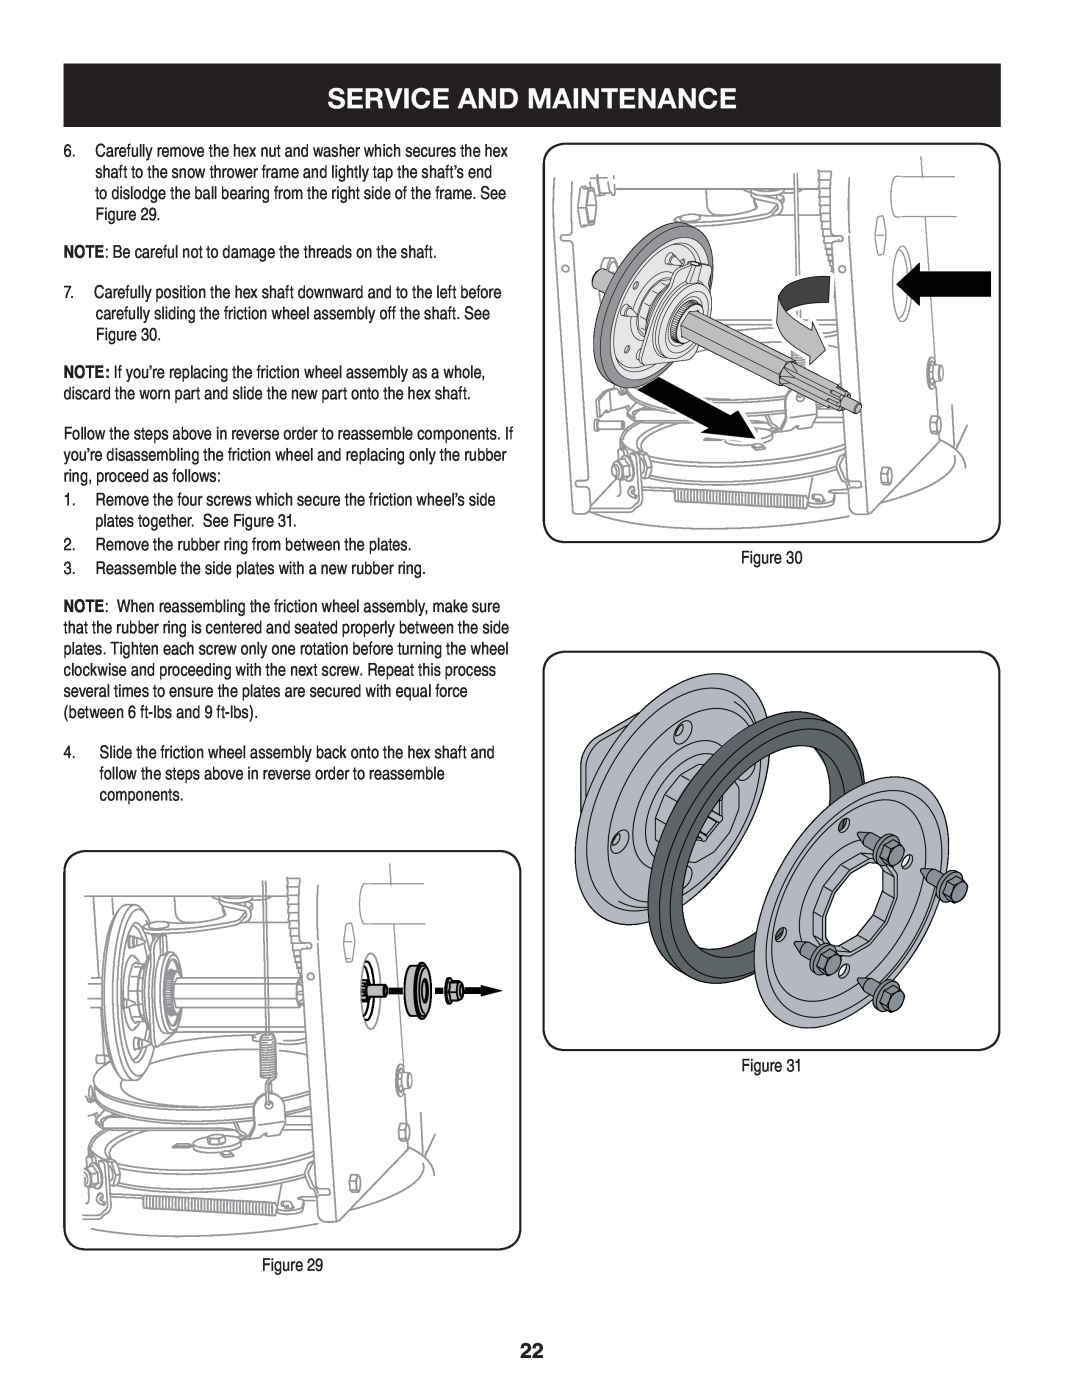 Craftsman 247.8819 operating instructions Service And Maintenance, Remove the rubber ring from between the plates 